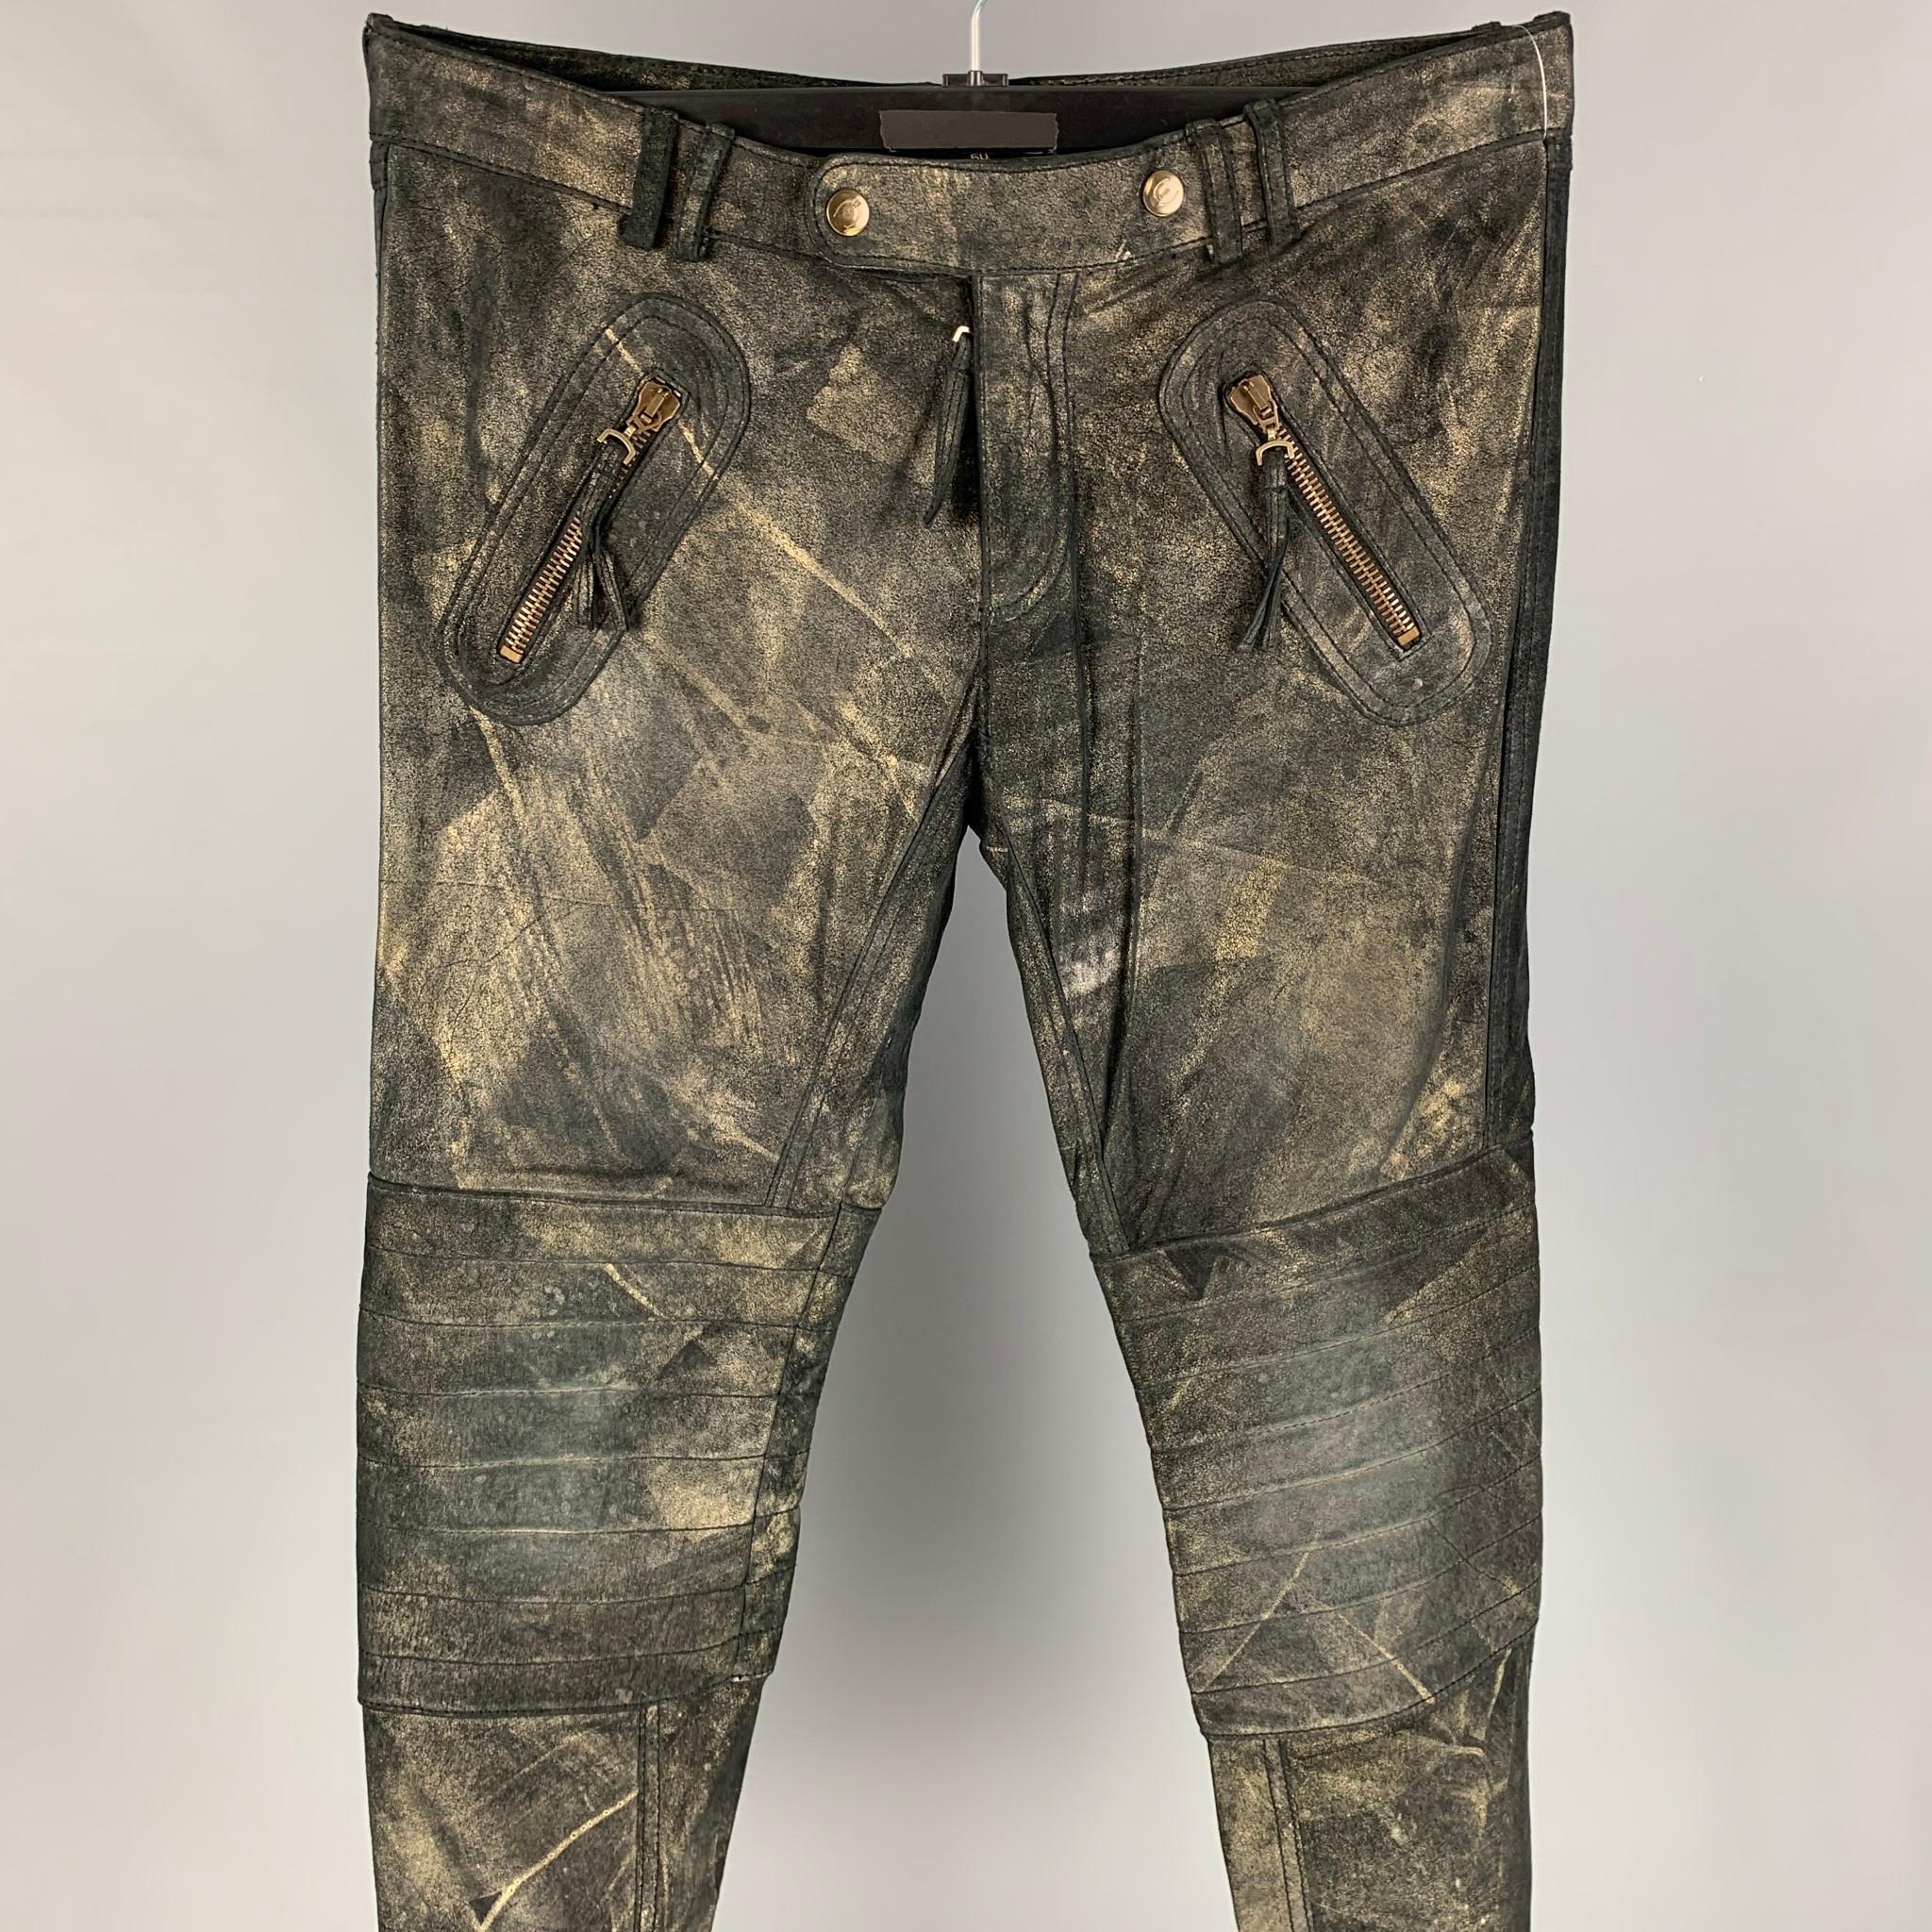 JUST CAVALLI casual pants comes in a black & gold metallic leather featuring a biker style, quilted knee panels, zipper pockets, zip fly, and a double snap button closure. Made in Italy. 

New With Tags. 
Marked: 50
Original Retail Price: